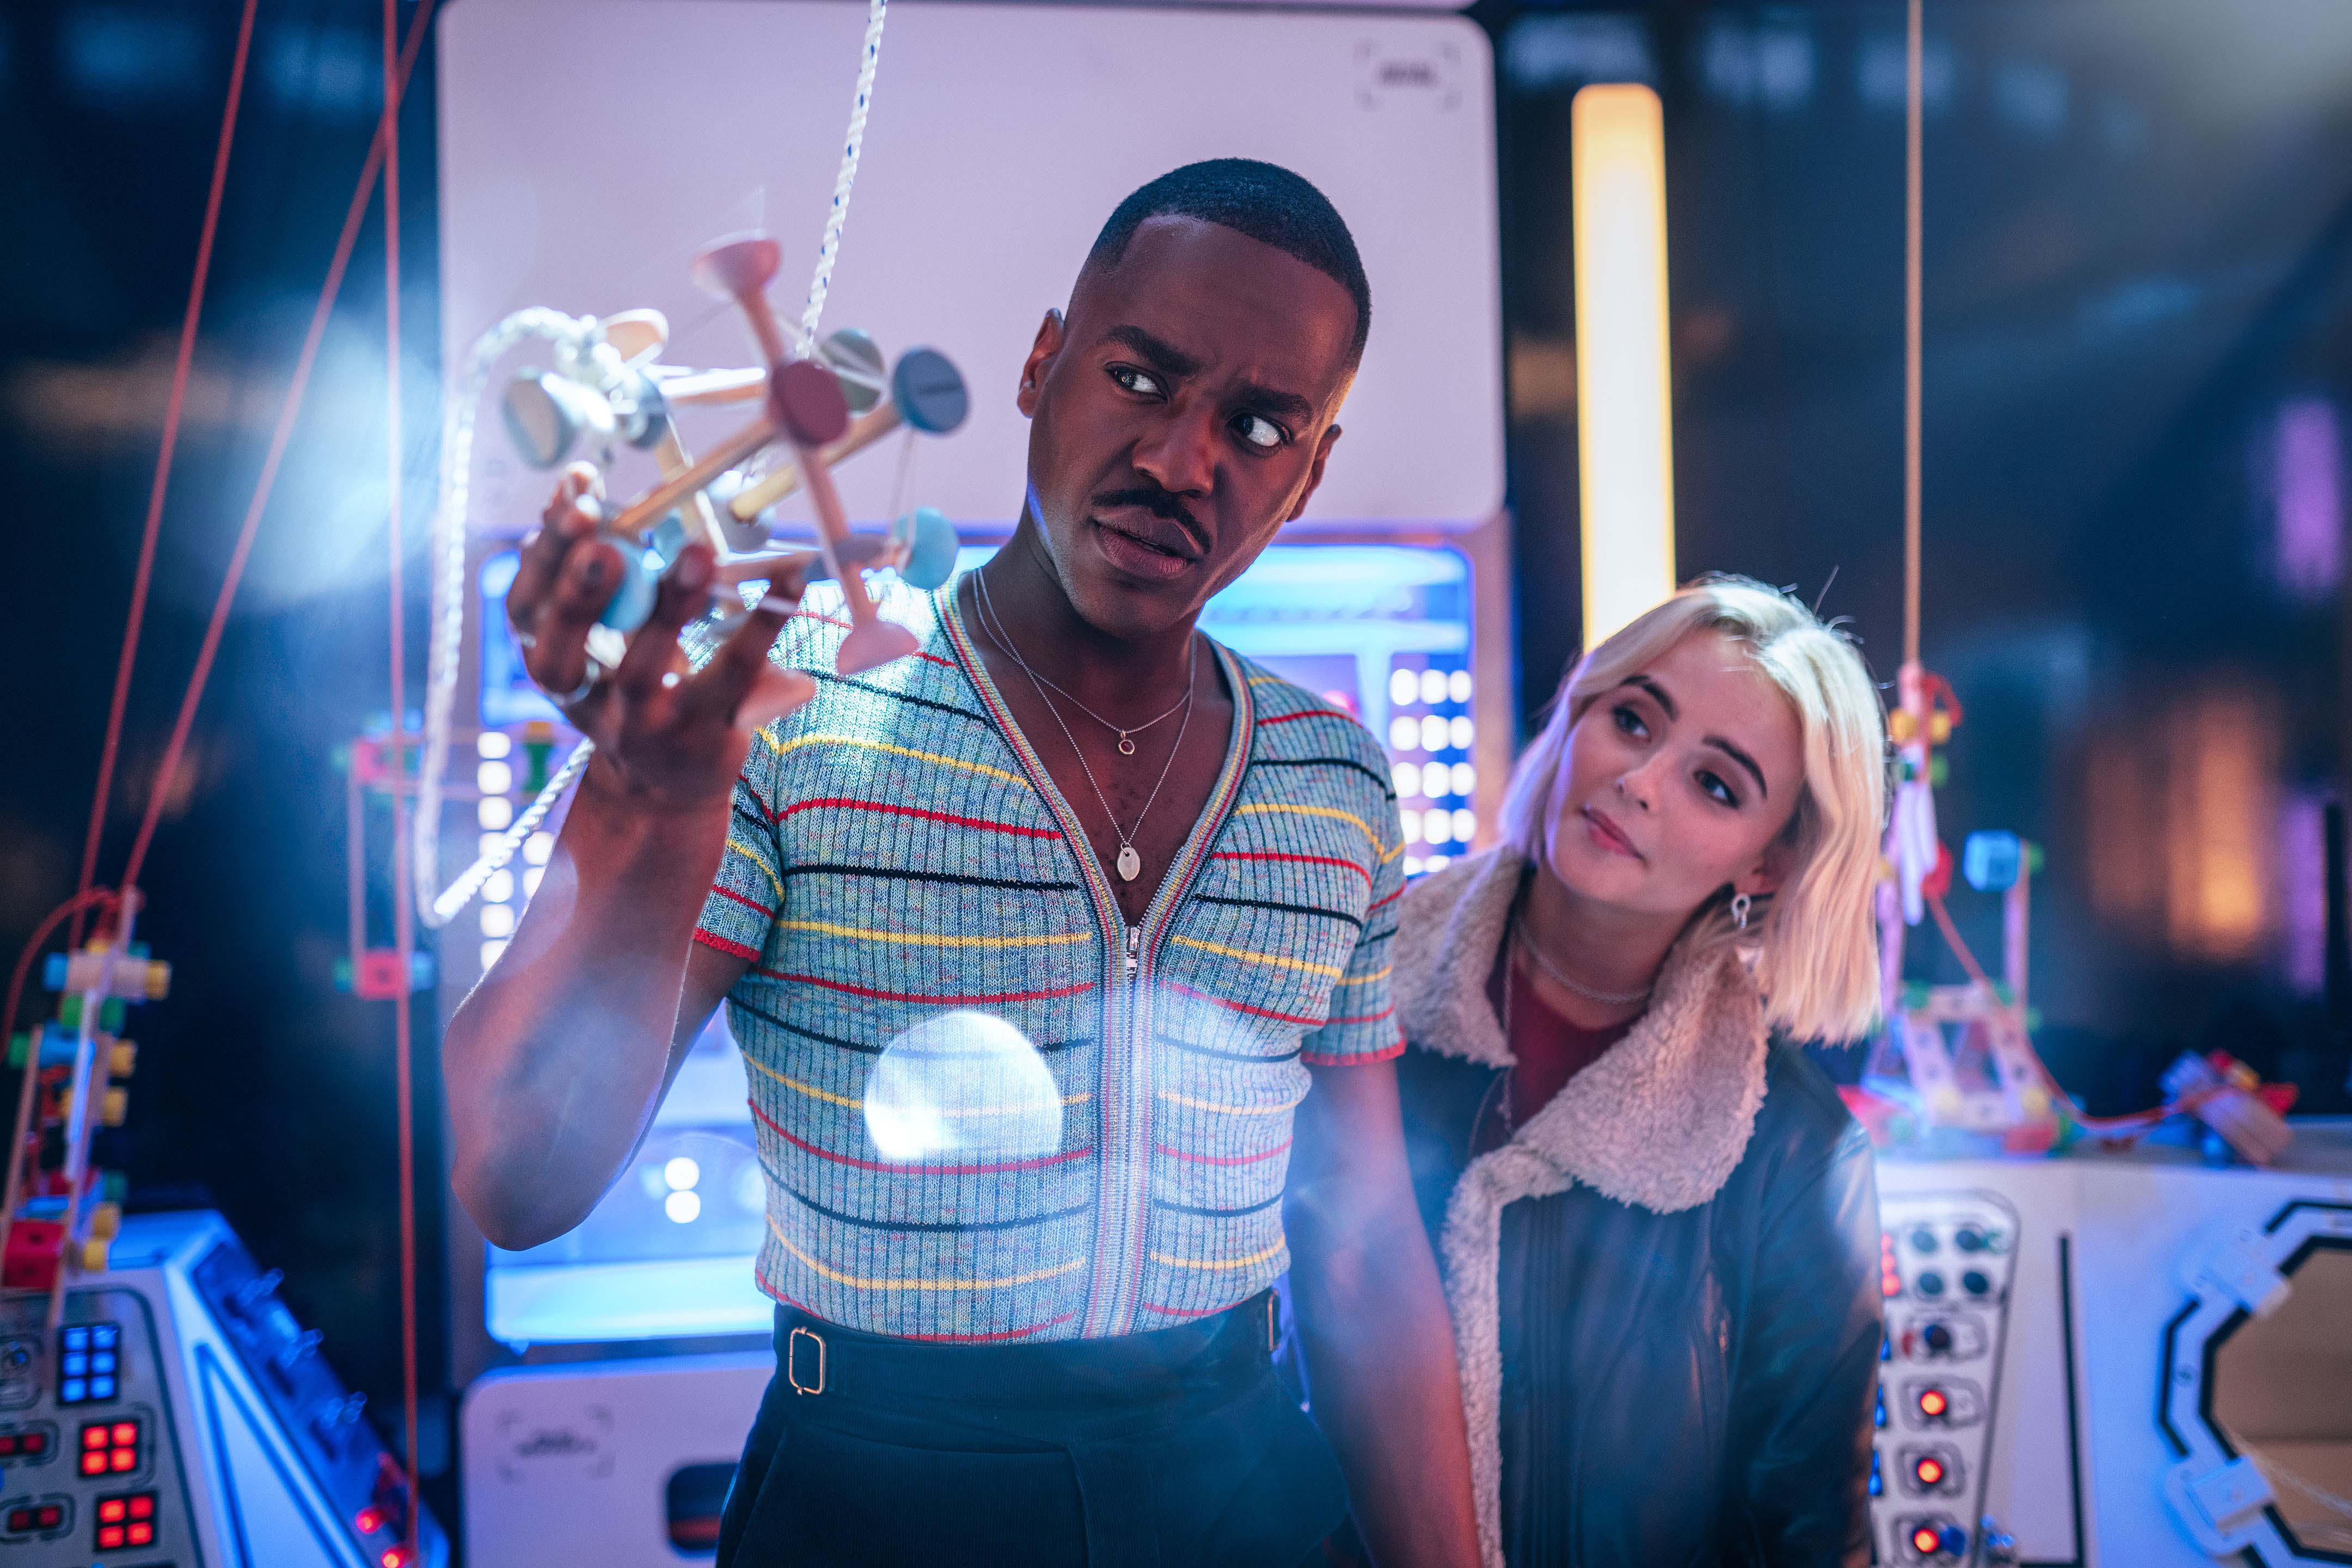 Doctor Who episodes 1 & 2 review: Space Babies may divide the fans, but Ncuti Gatwa and Millie Gibson make for an immediately winning new TARDIS team